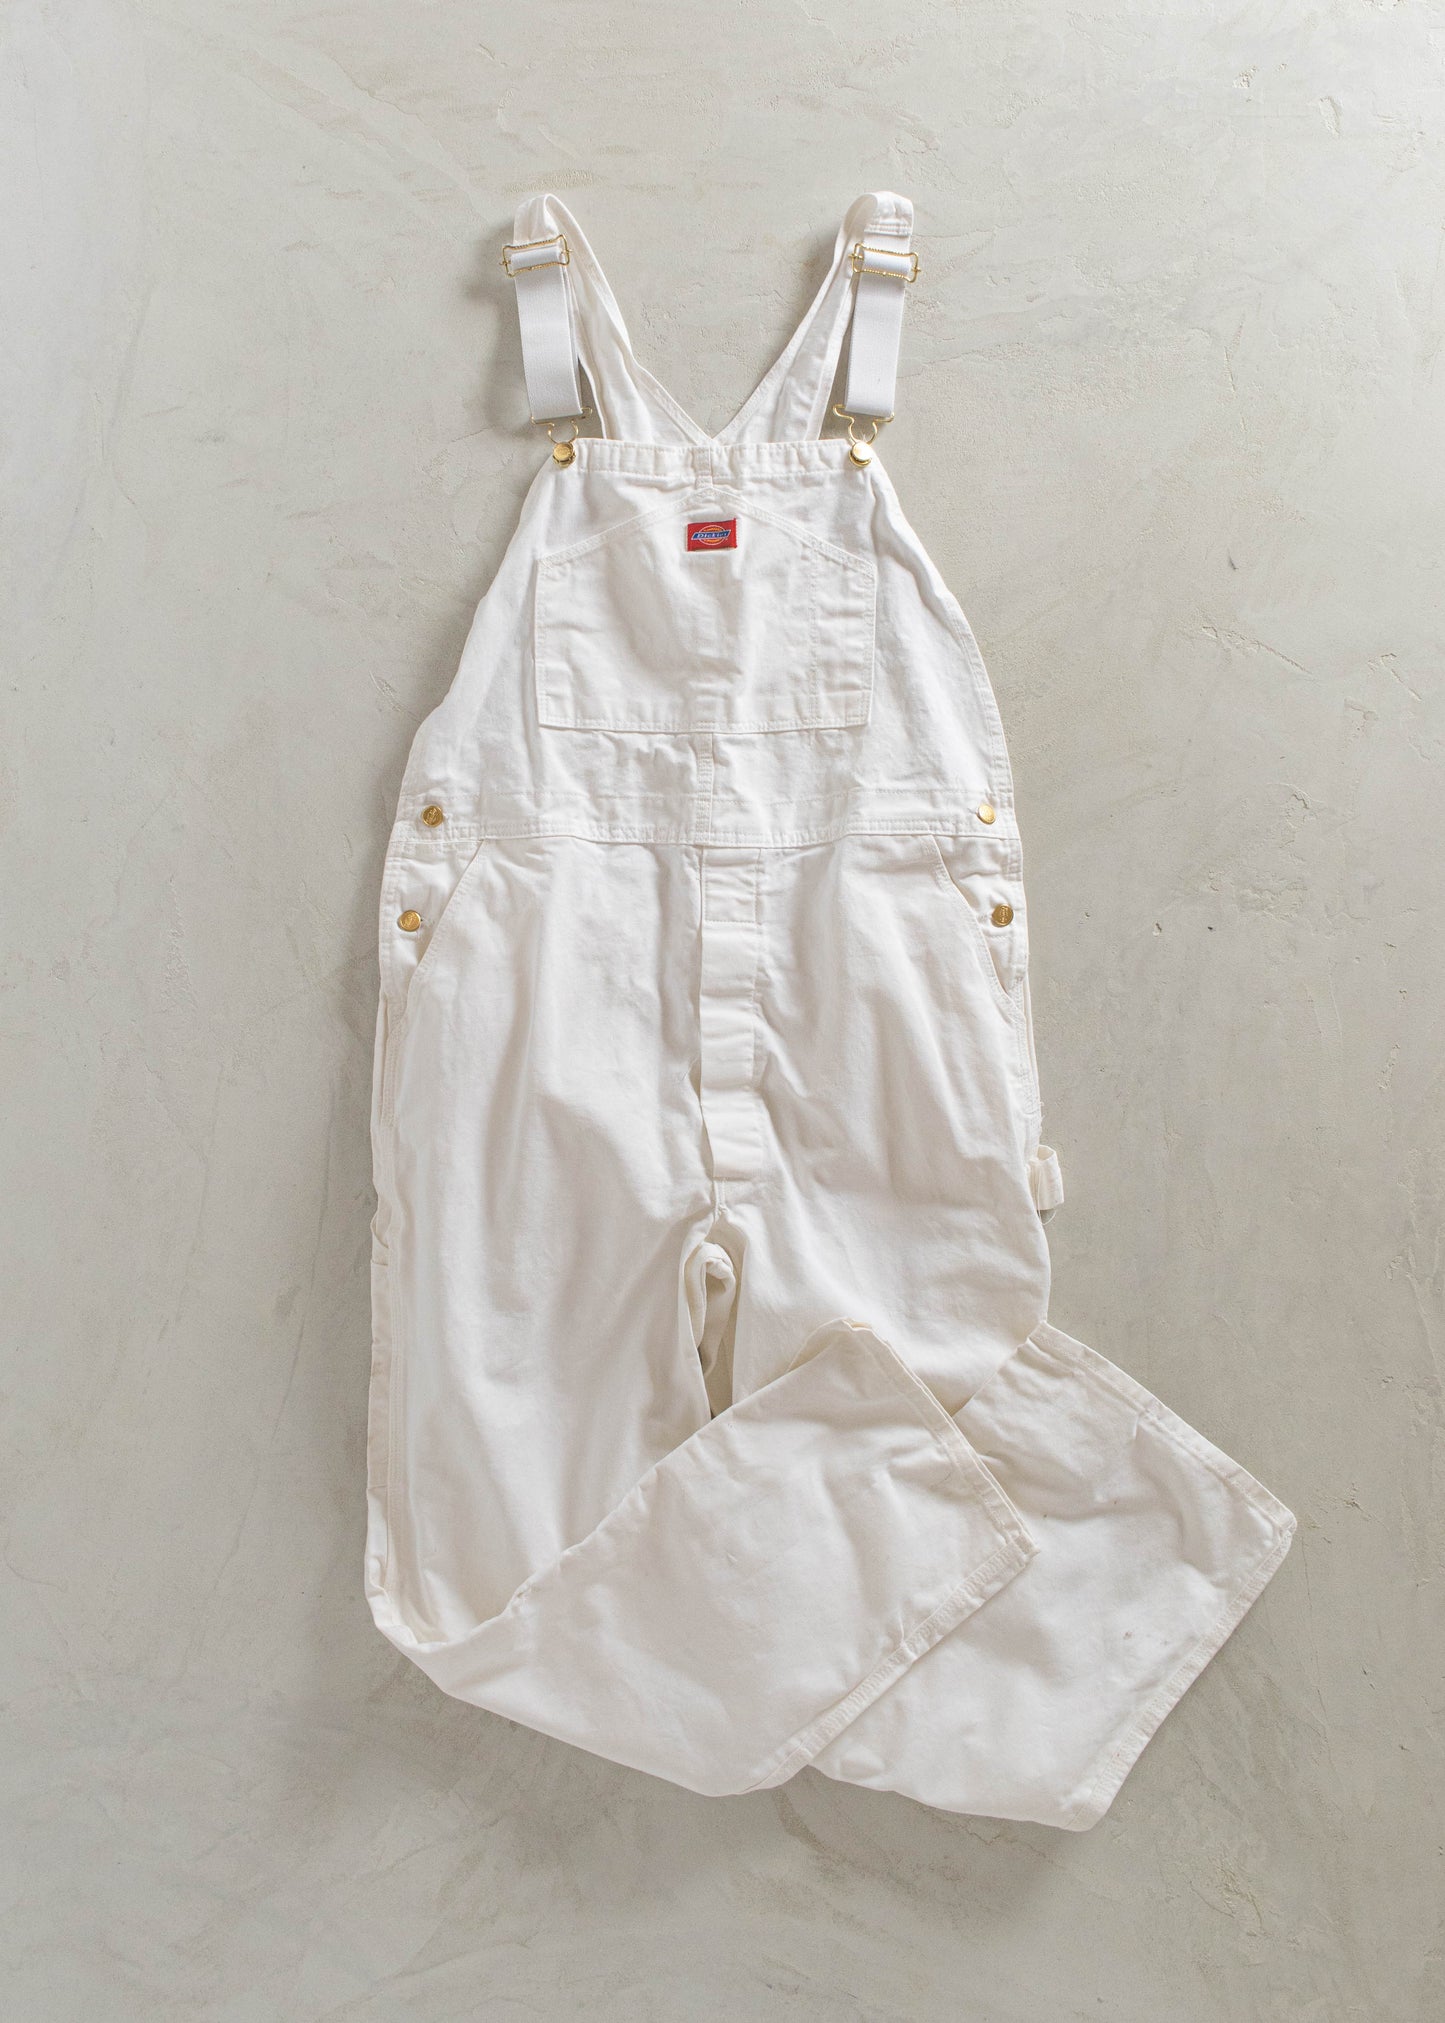 1990s Dickies Canvas Overalls Size XL/2XL